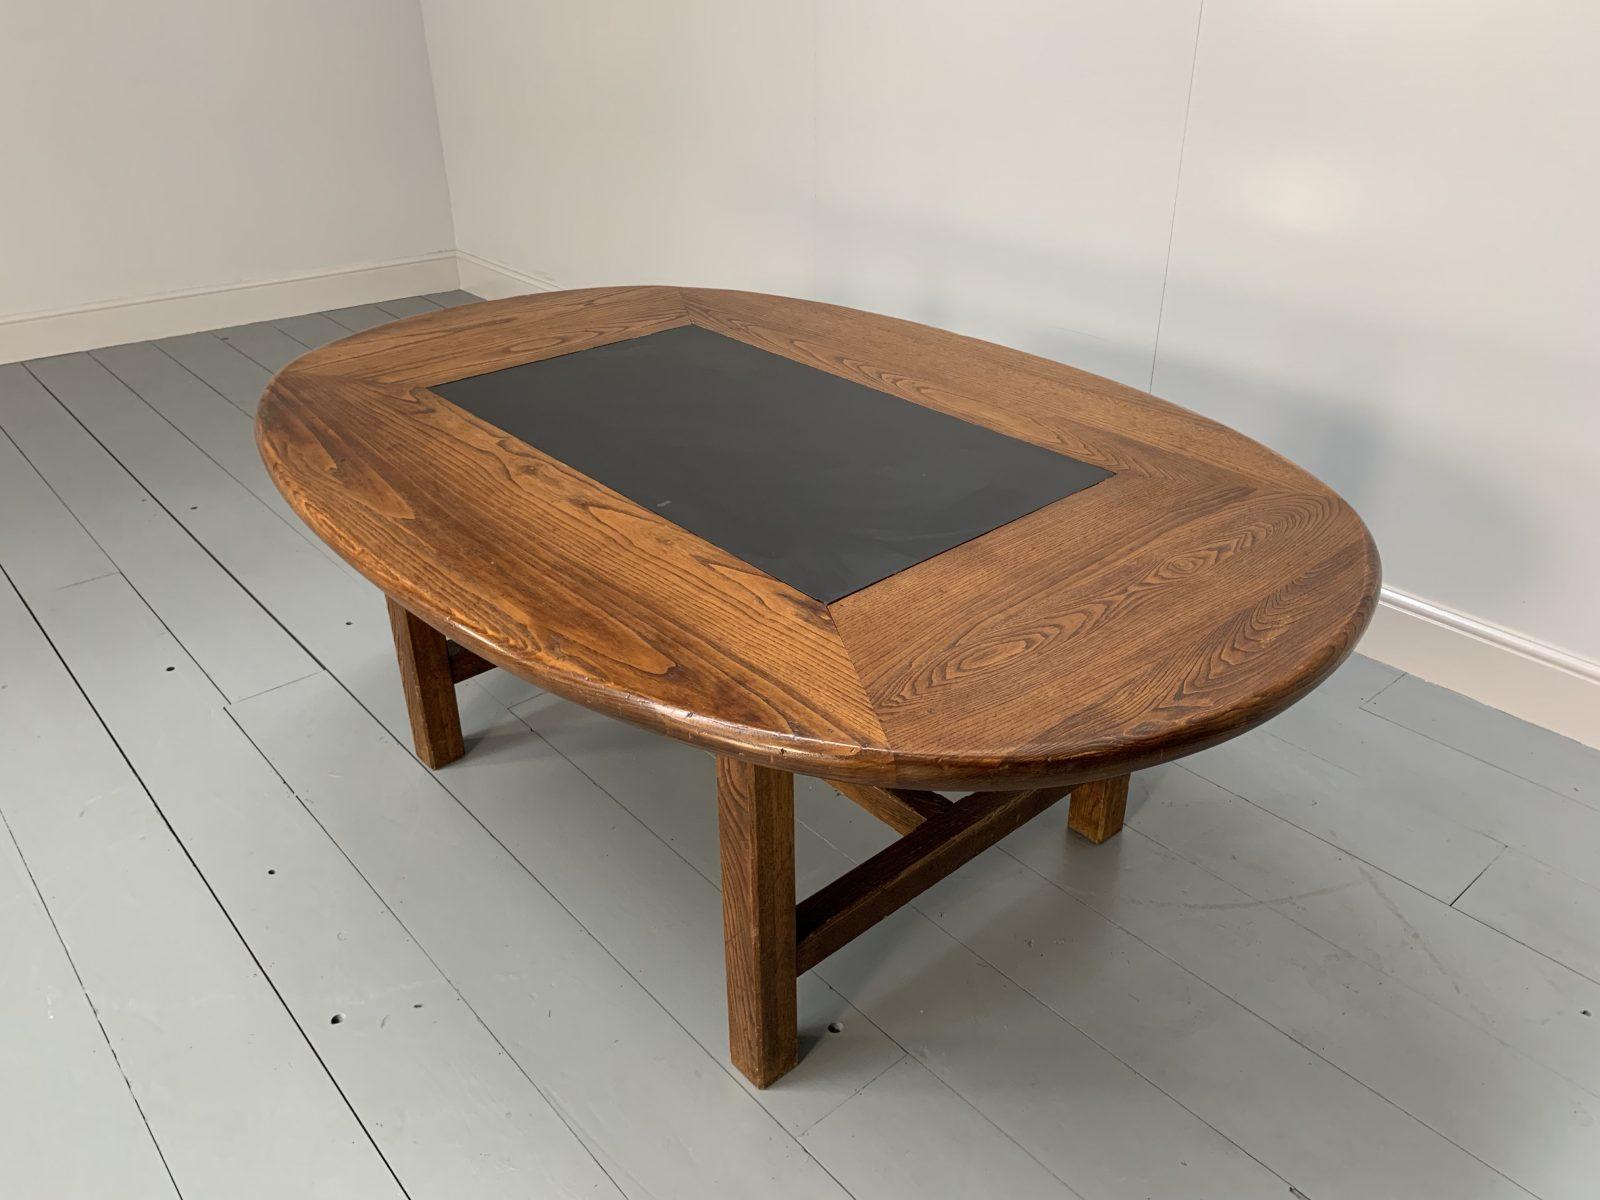 Hello Friends, and welcome to another unmissable offering from Lord Browns Furniture, the UK’s premier resource for fine Sofas and Chairs.

On offer on this occasion is a rare, sublime Oval Dining-Table in Chestnut and Slate, from the world renown